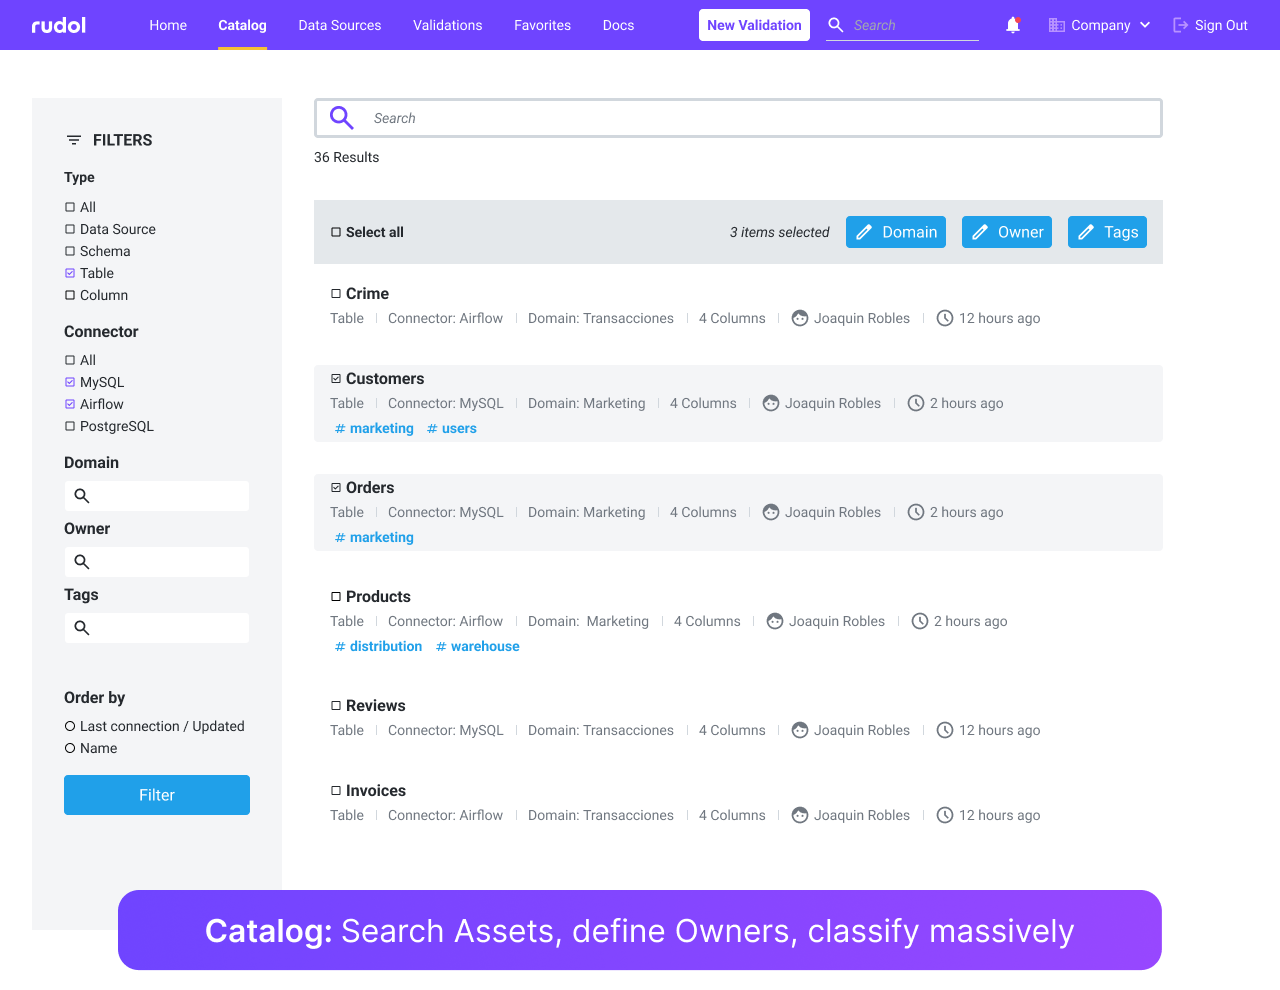 Catalog: Search Assets, define Owners, classify massively